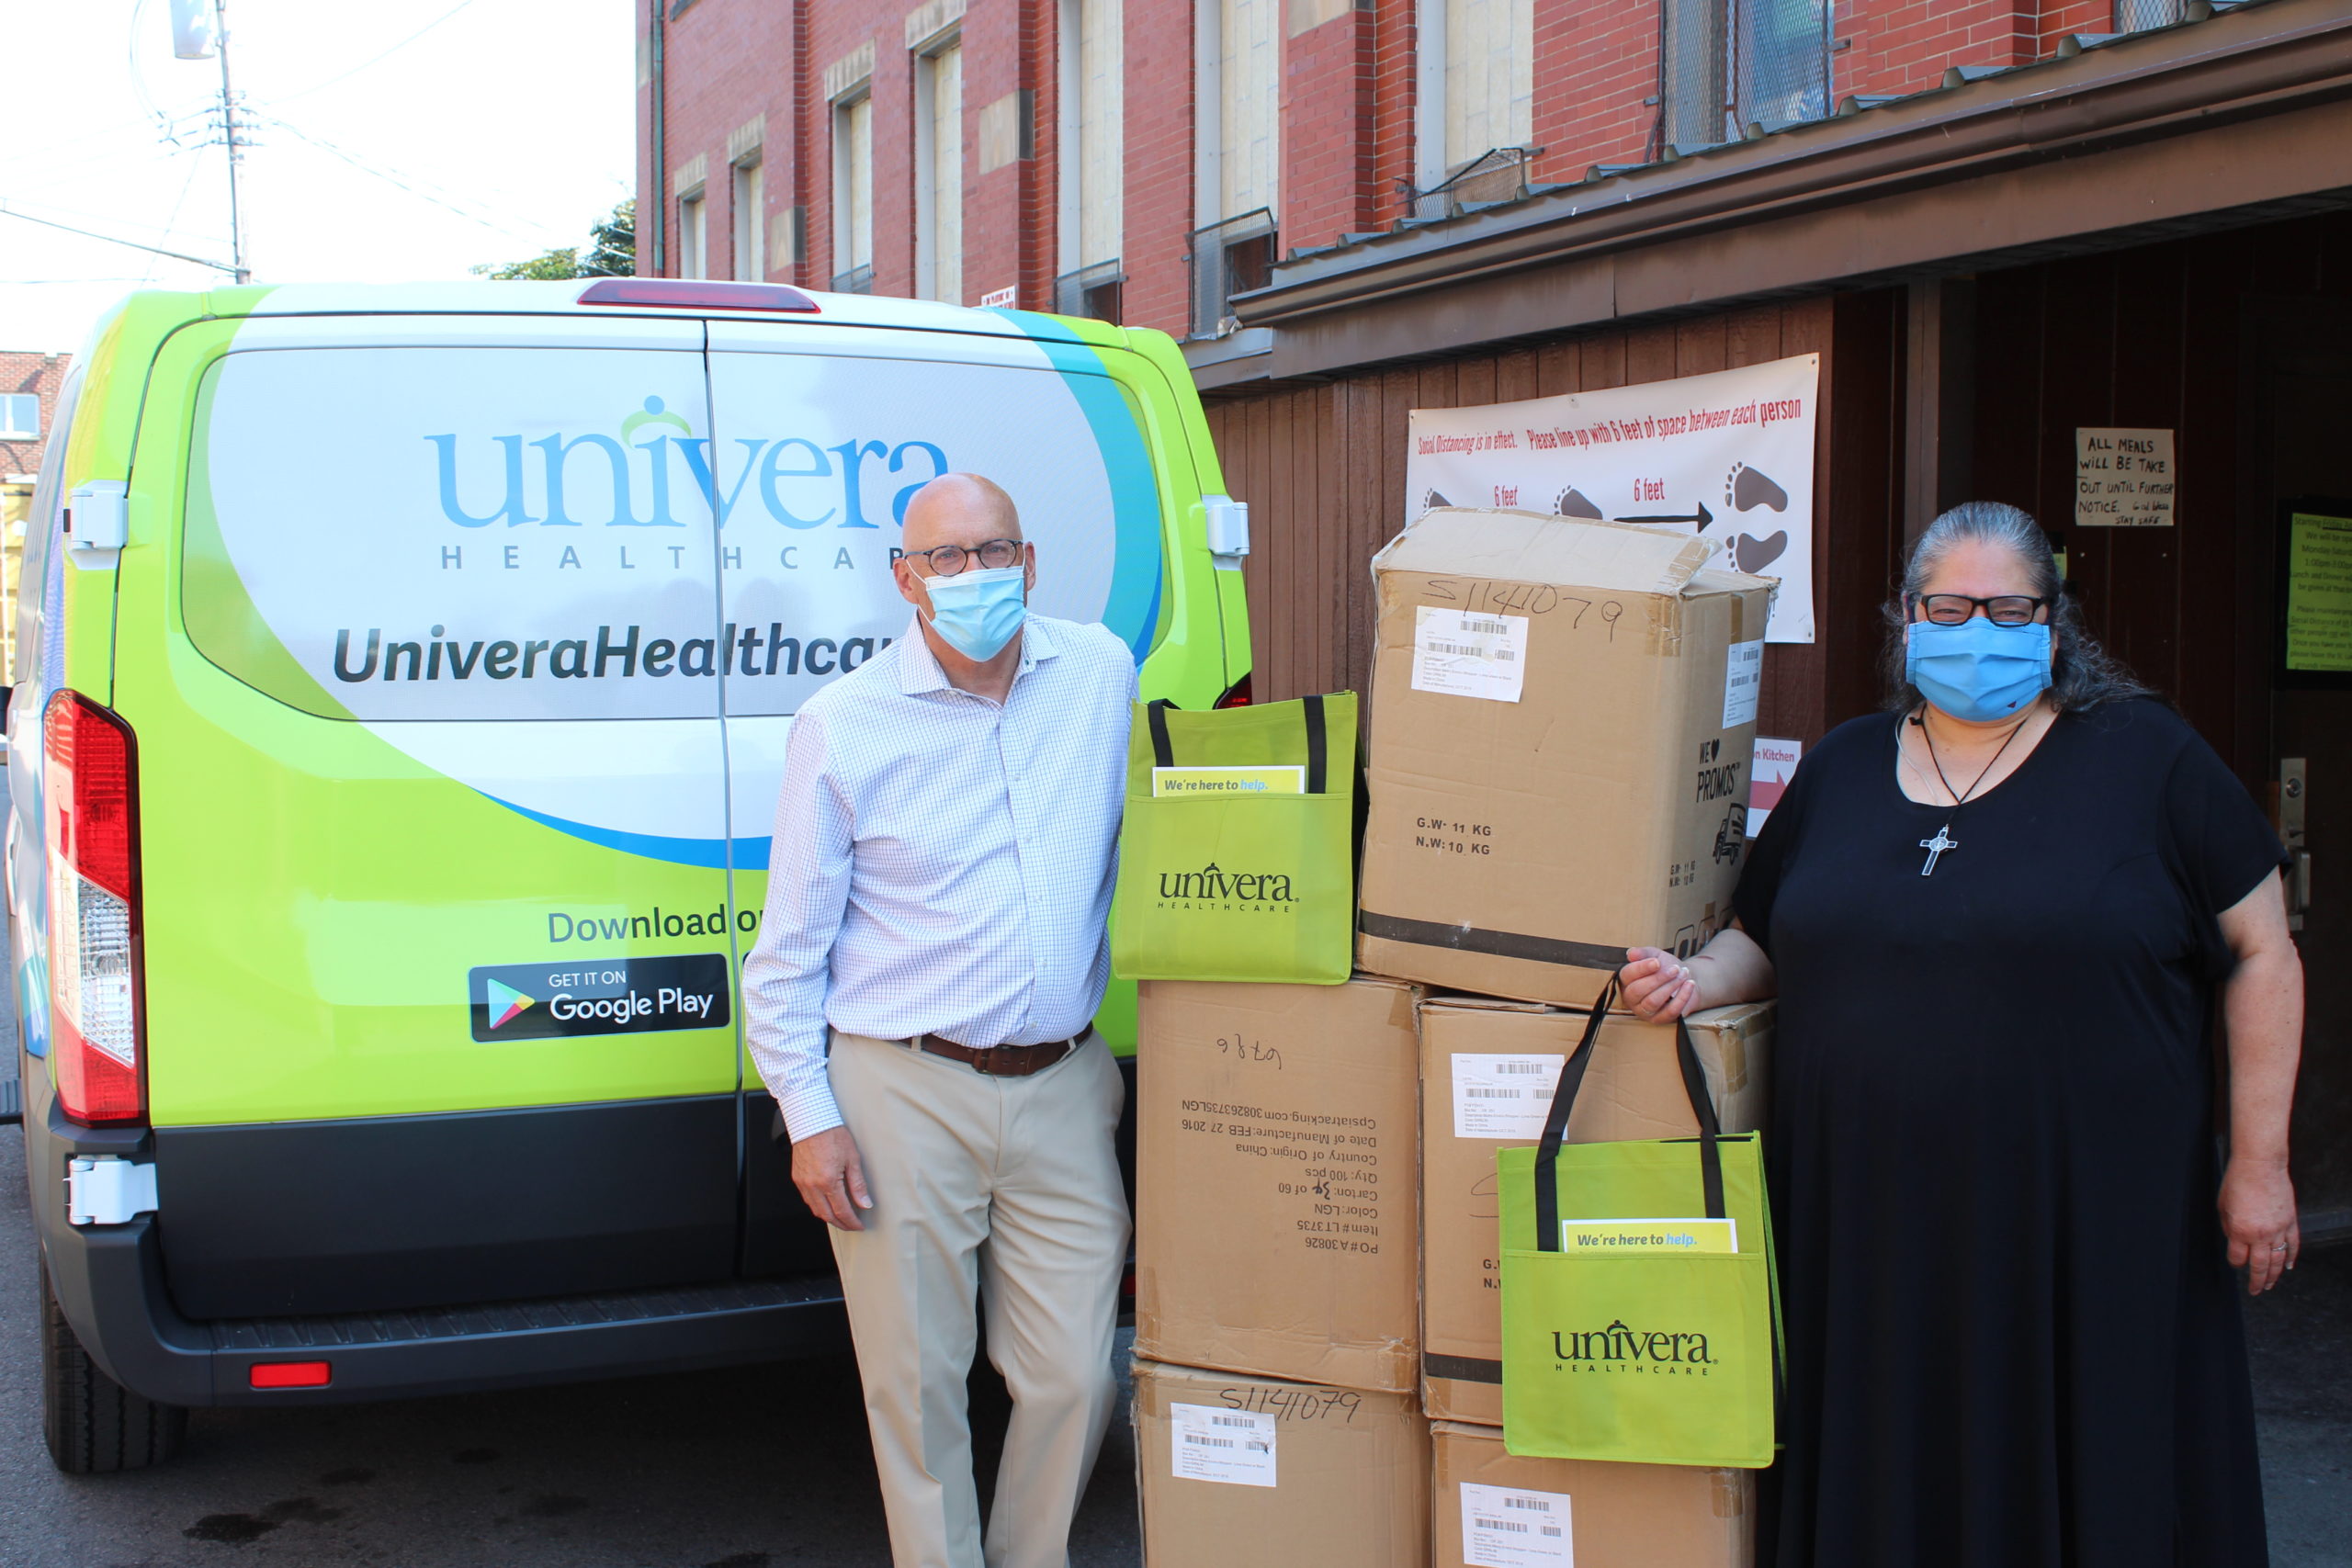 Univera’s COVID-19 Response Includes Donations to Food Banks